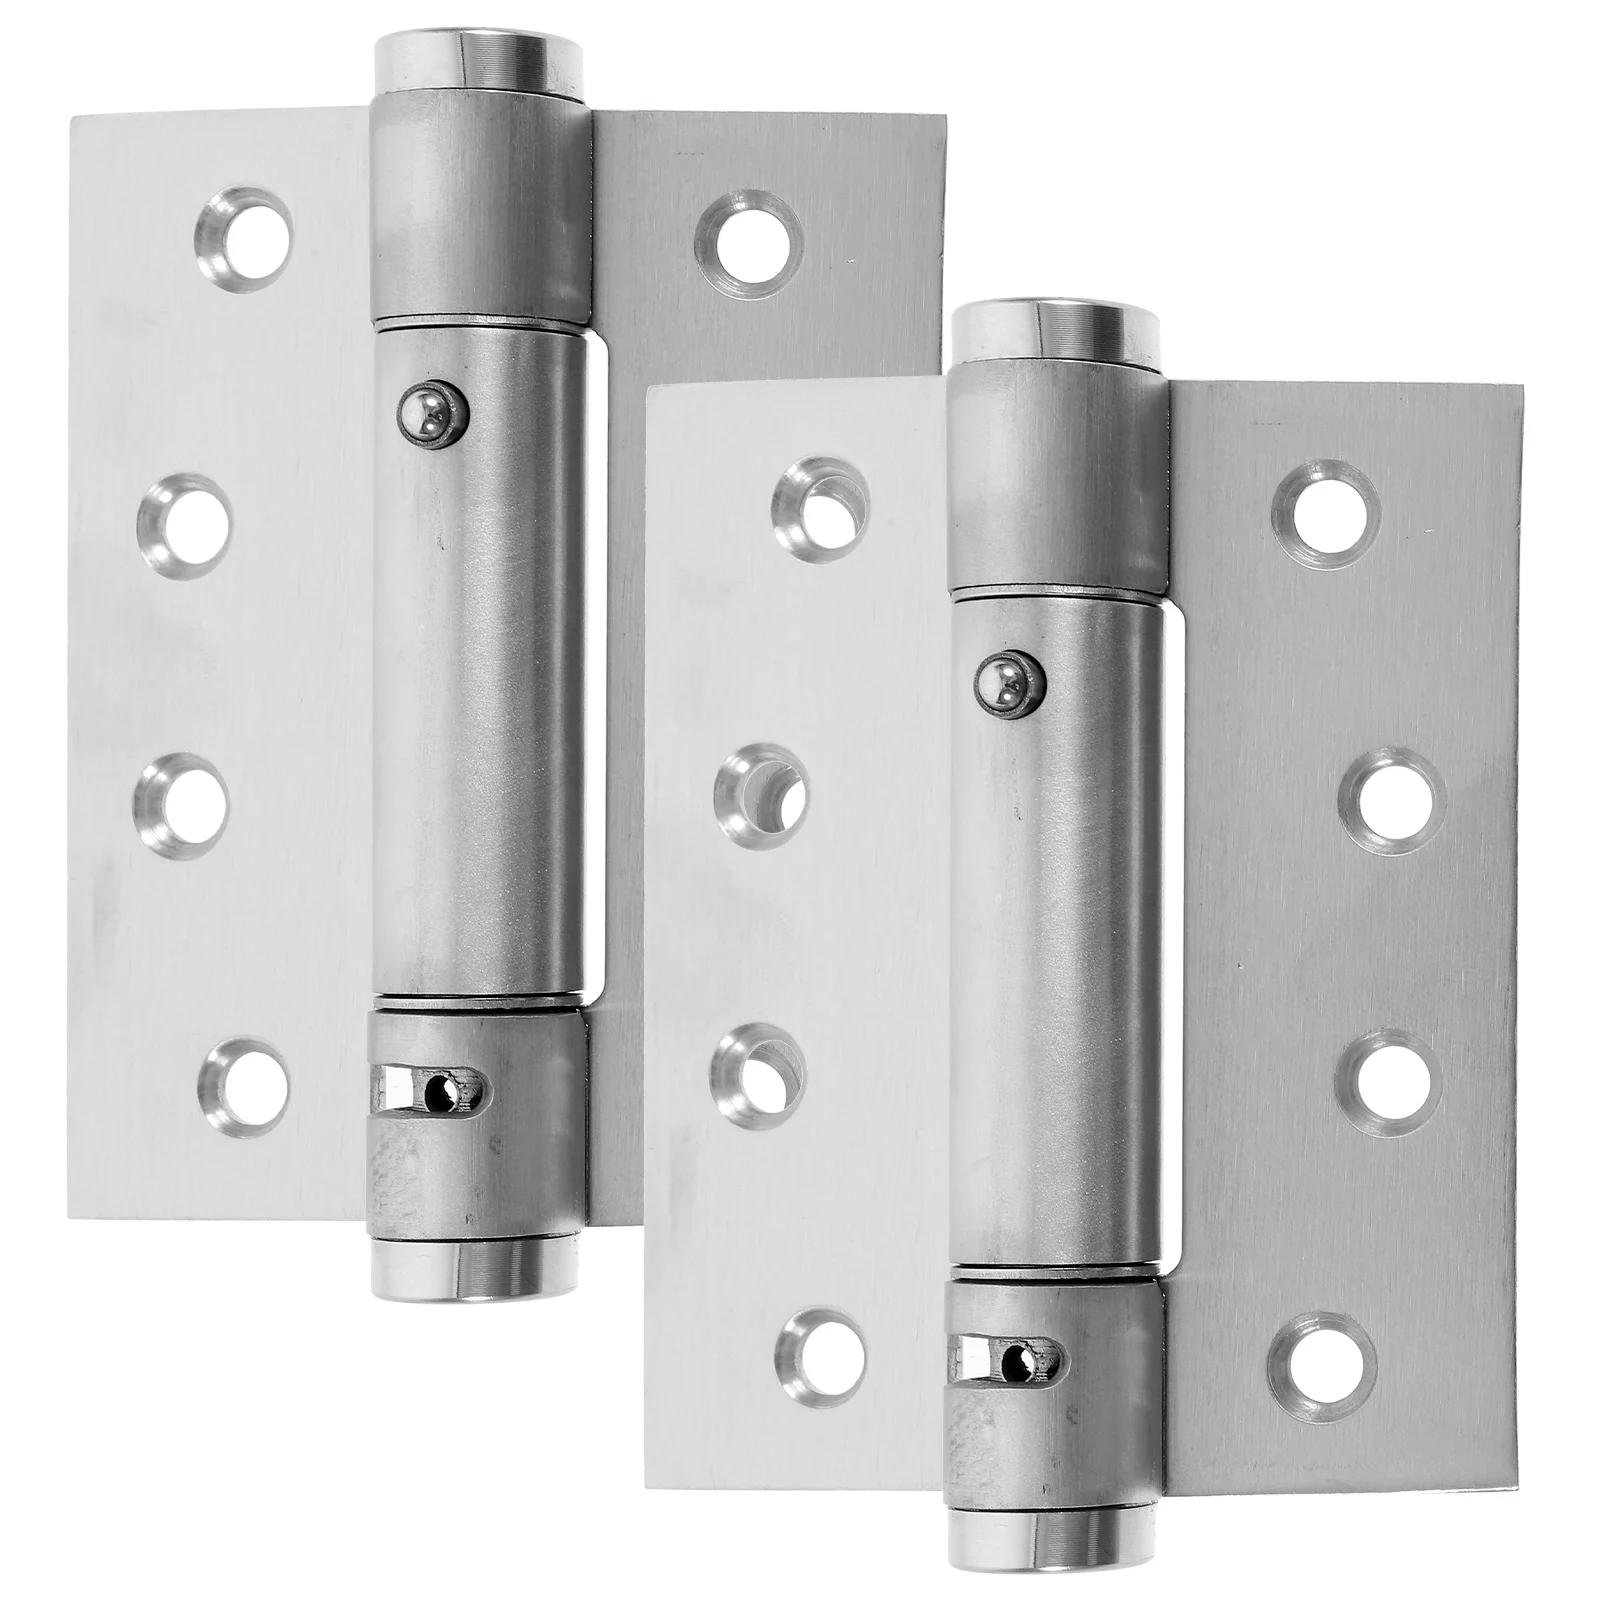 

Stainless Steel Spring Hinge Automatic Cabinet Door Wardrobe Hardware And Furniture Fittings Self Closing Spring Hinges